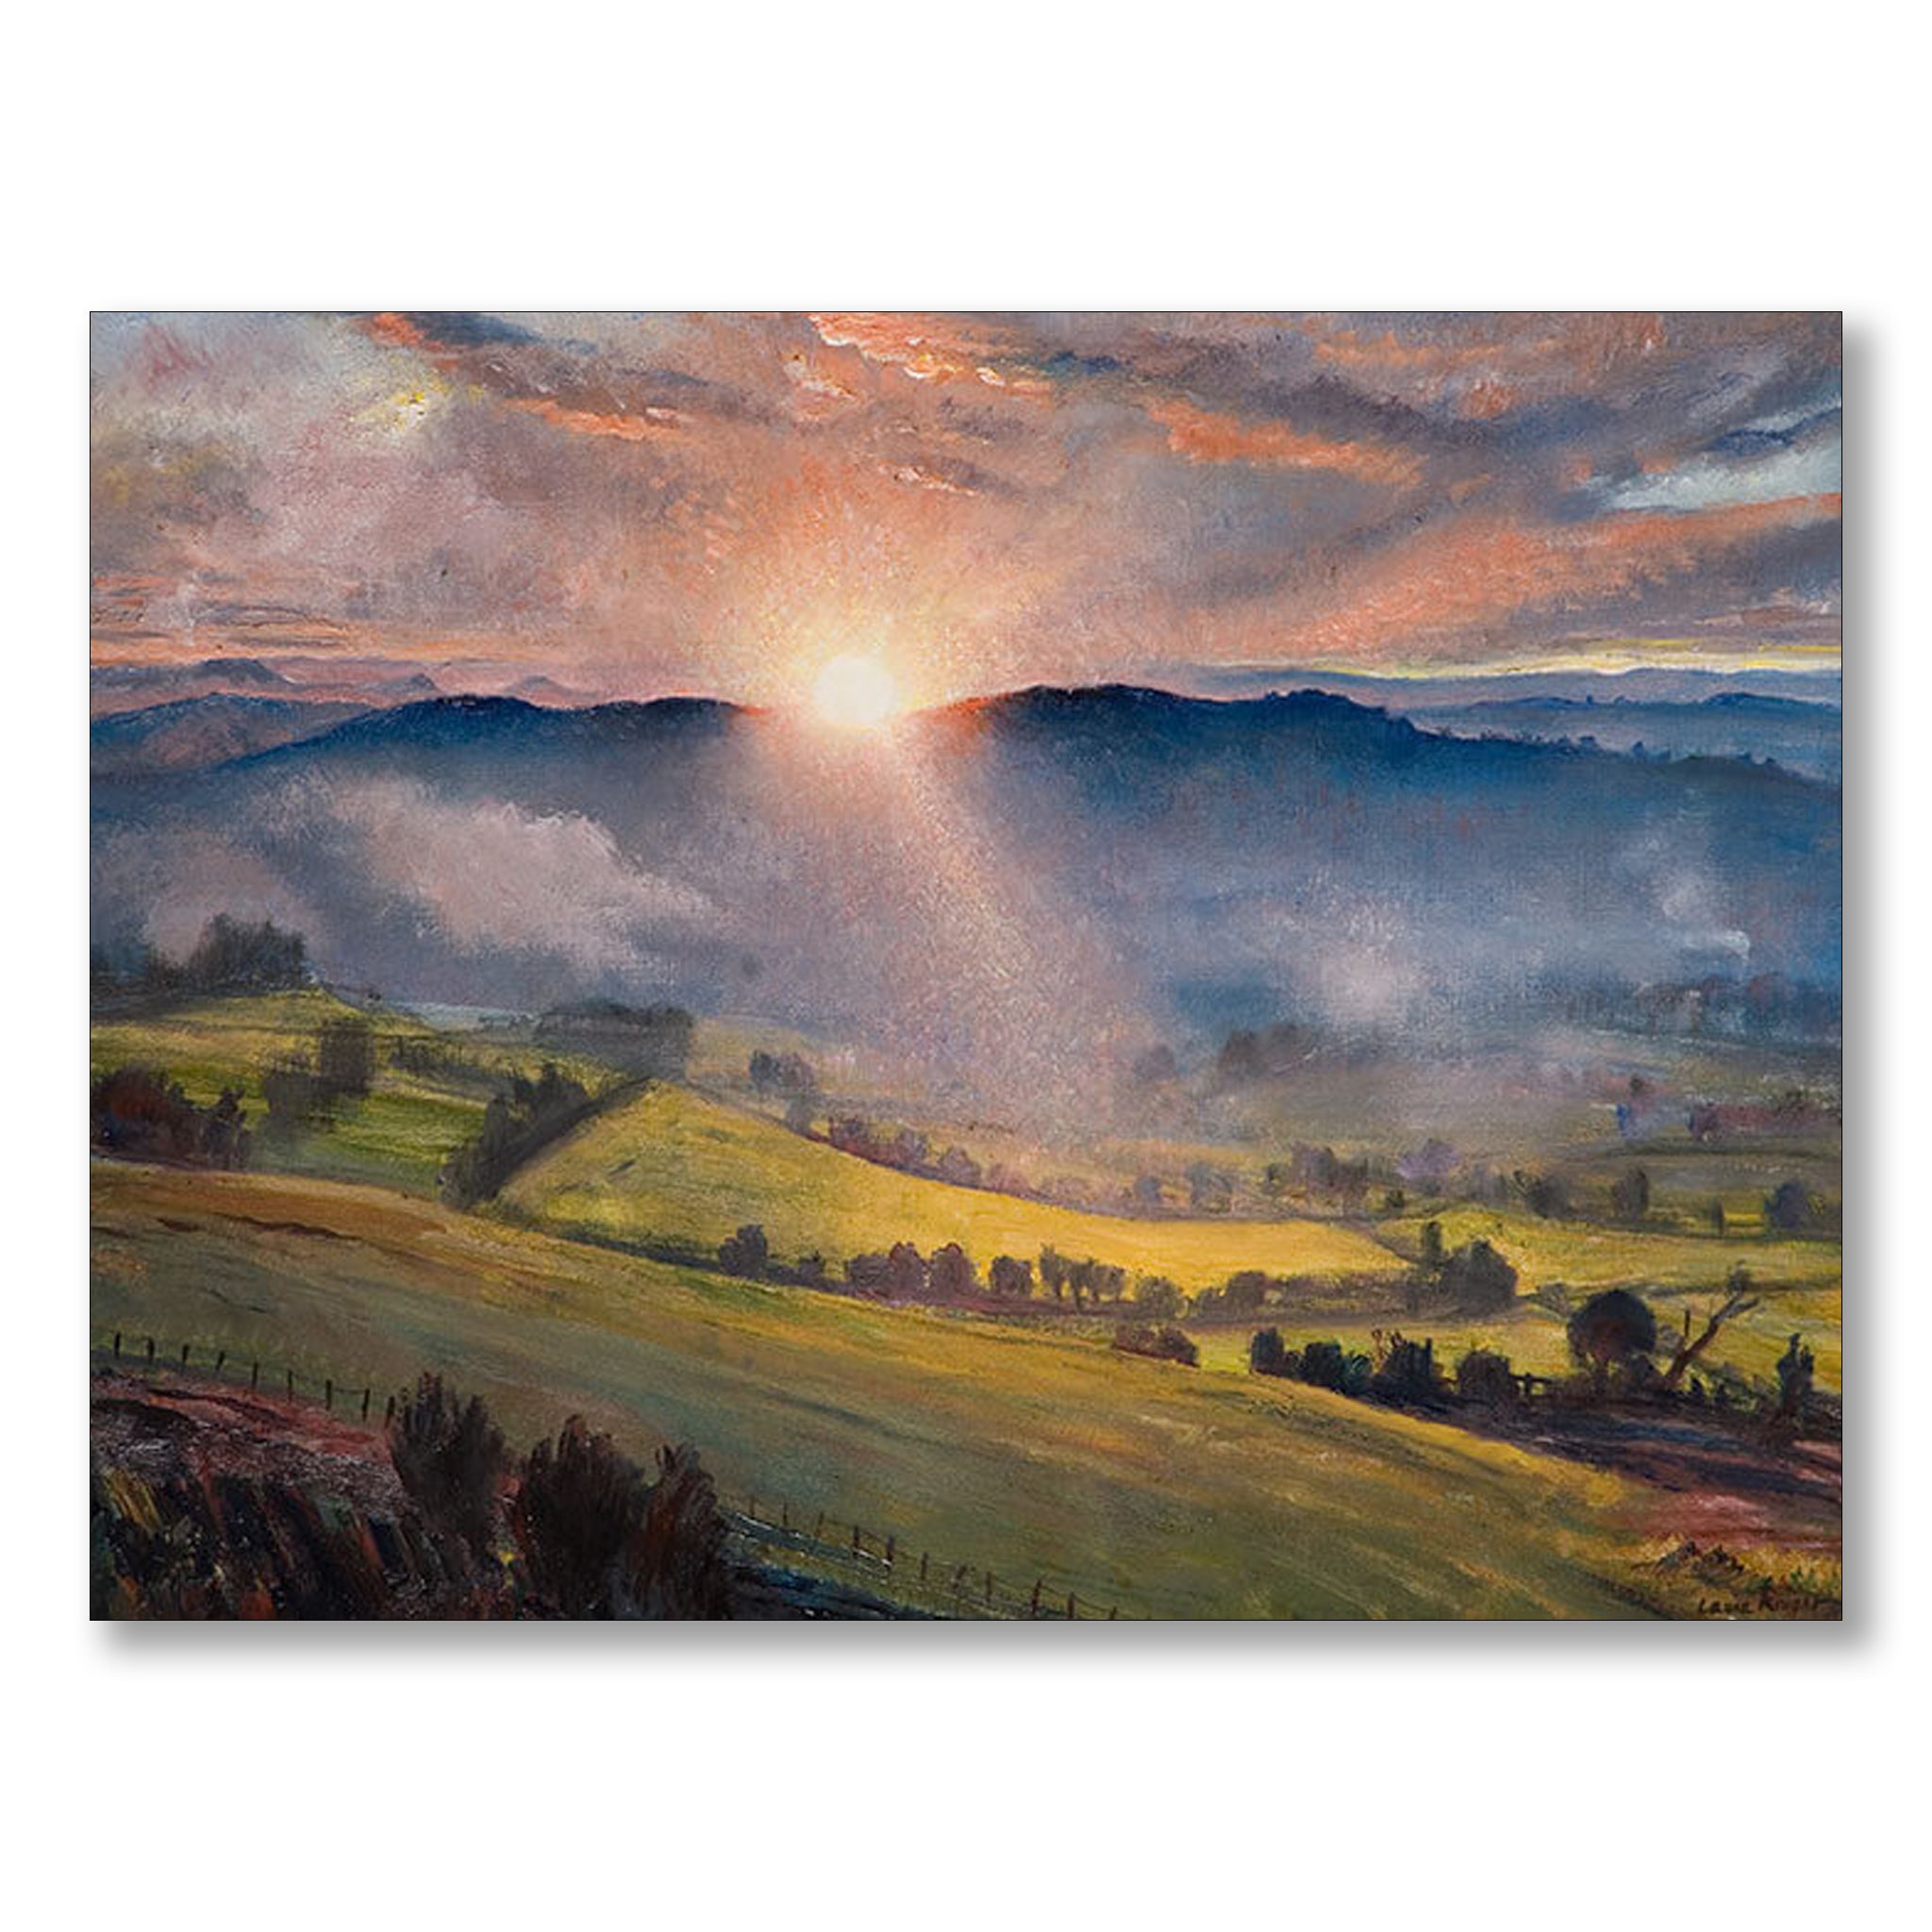 Sunset Greeting Card by Laura Knight